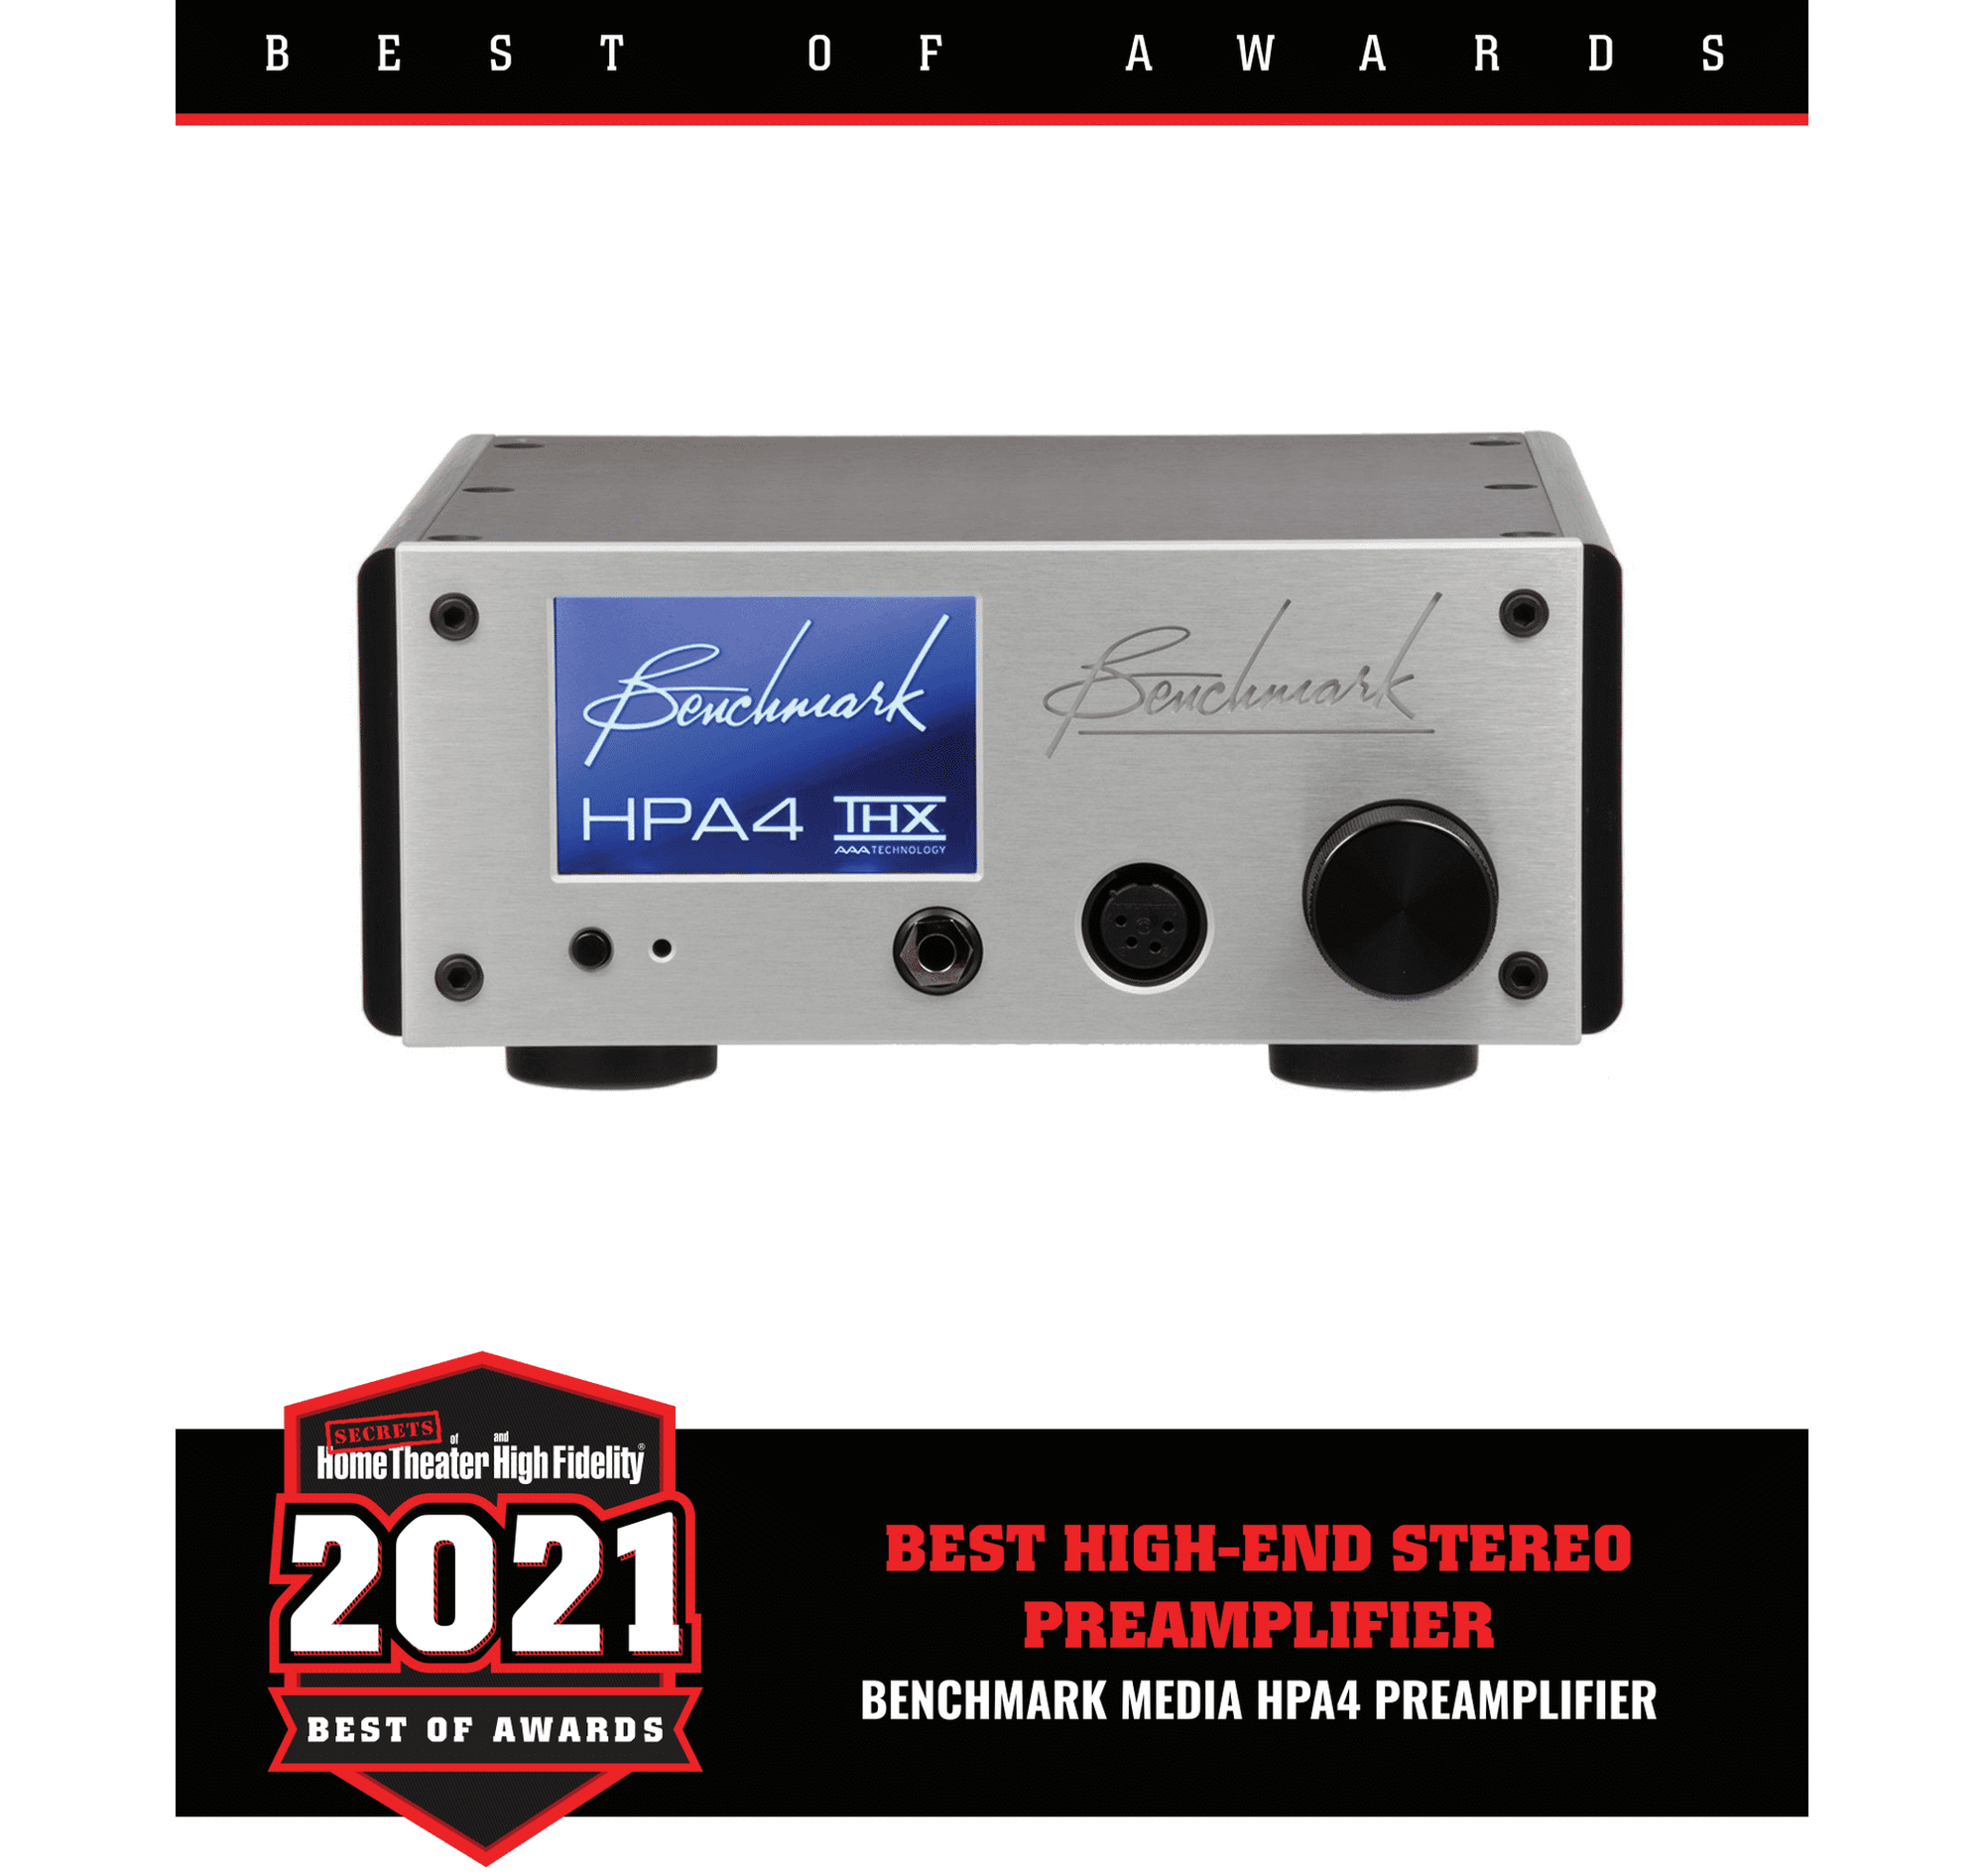 Home Theater and High Fidelity - Best High-End Stereo Preamplifier 2021